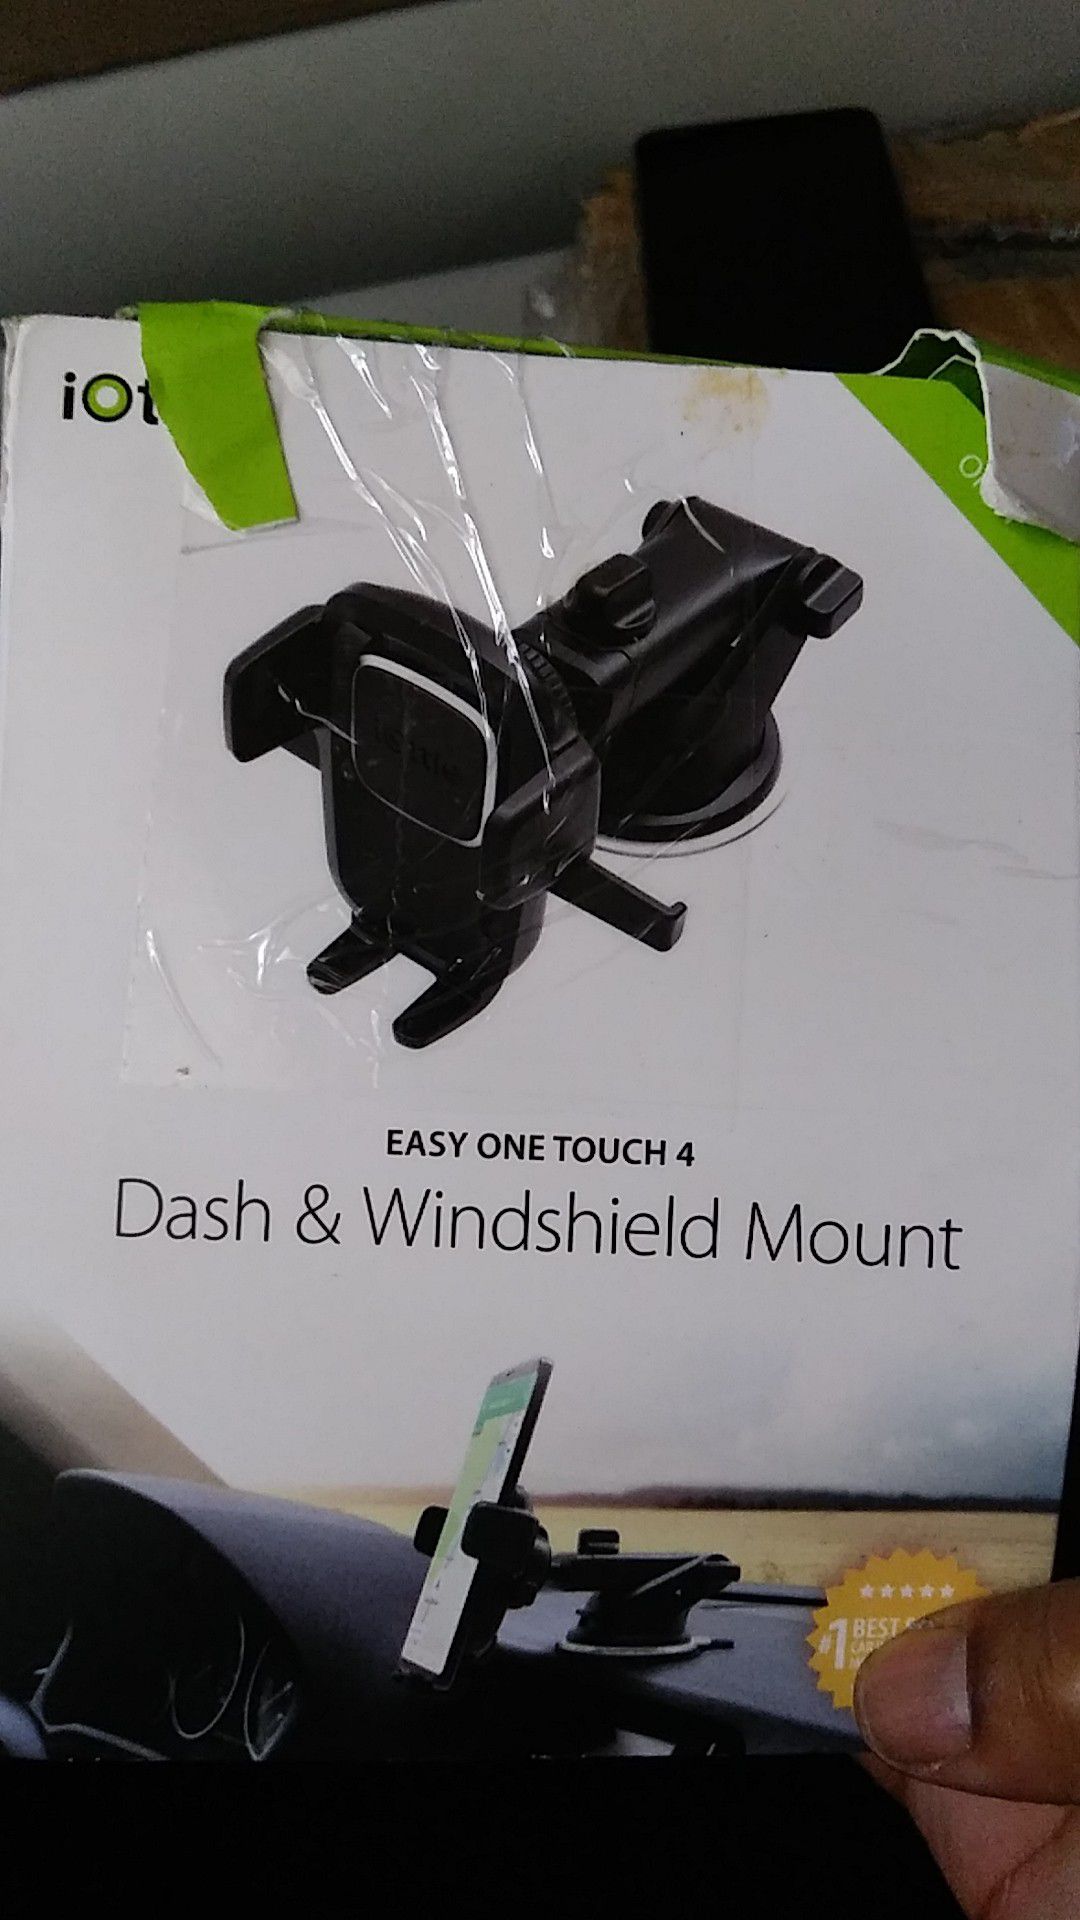 – and windshield mount